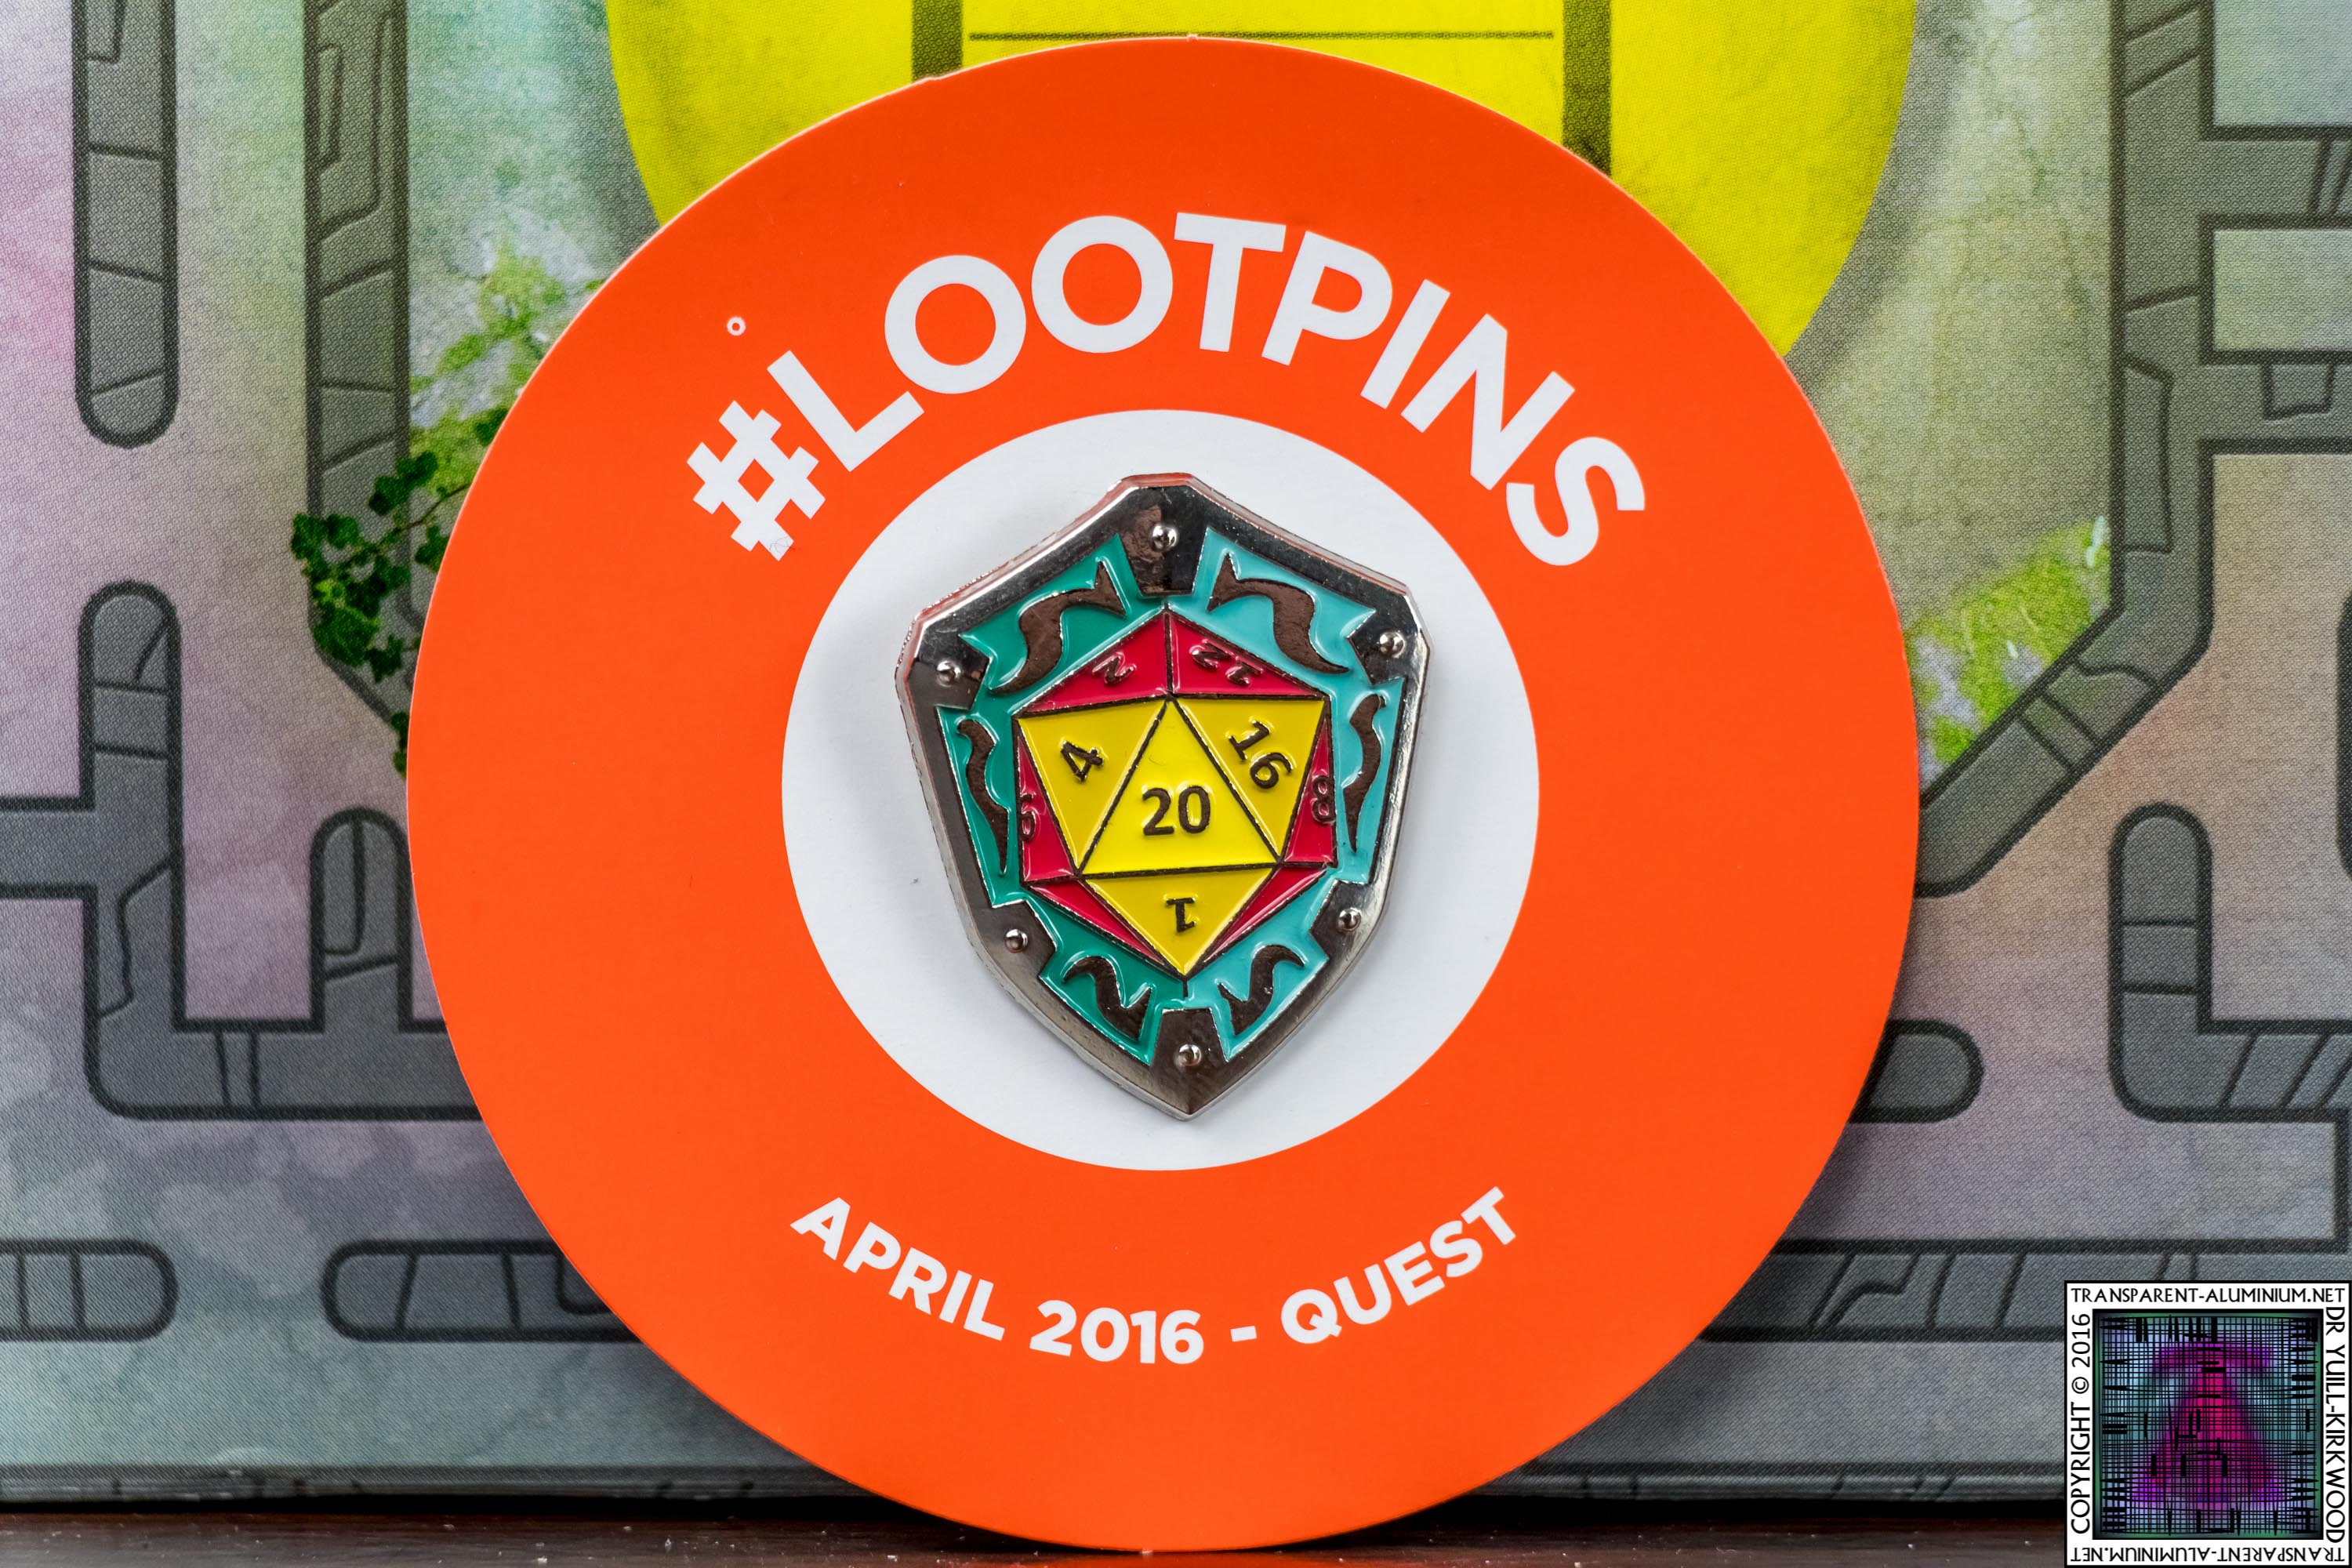 Gallery: Loot Crate 'Quest' April 2016 Box